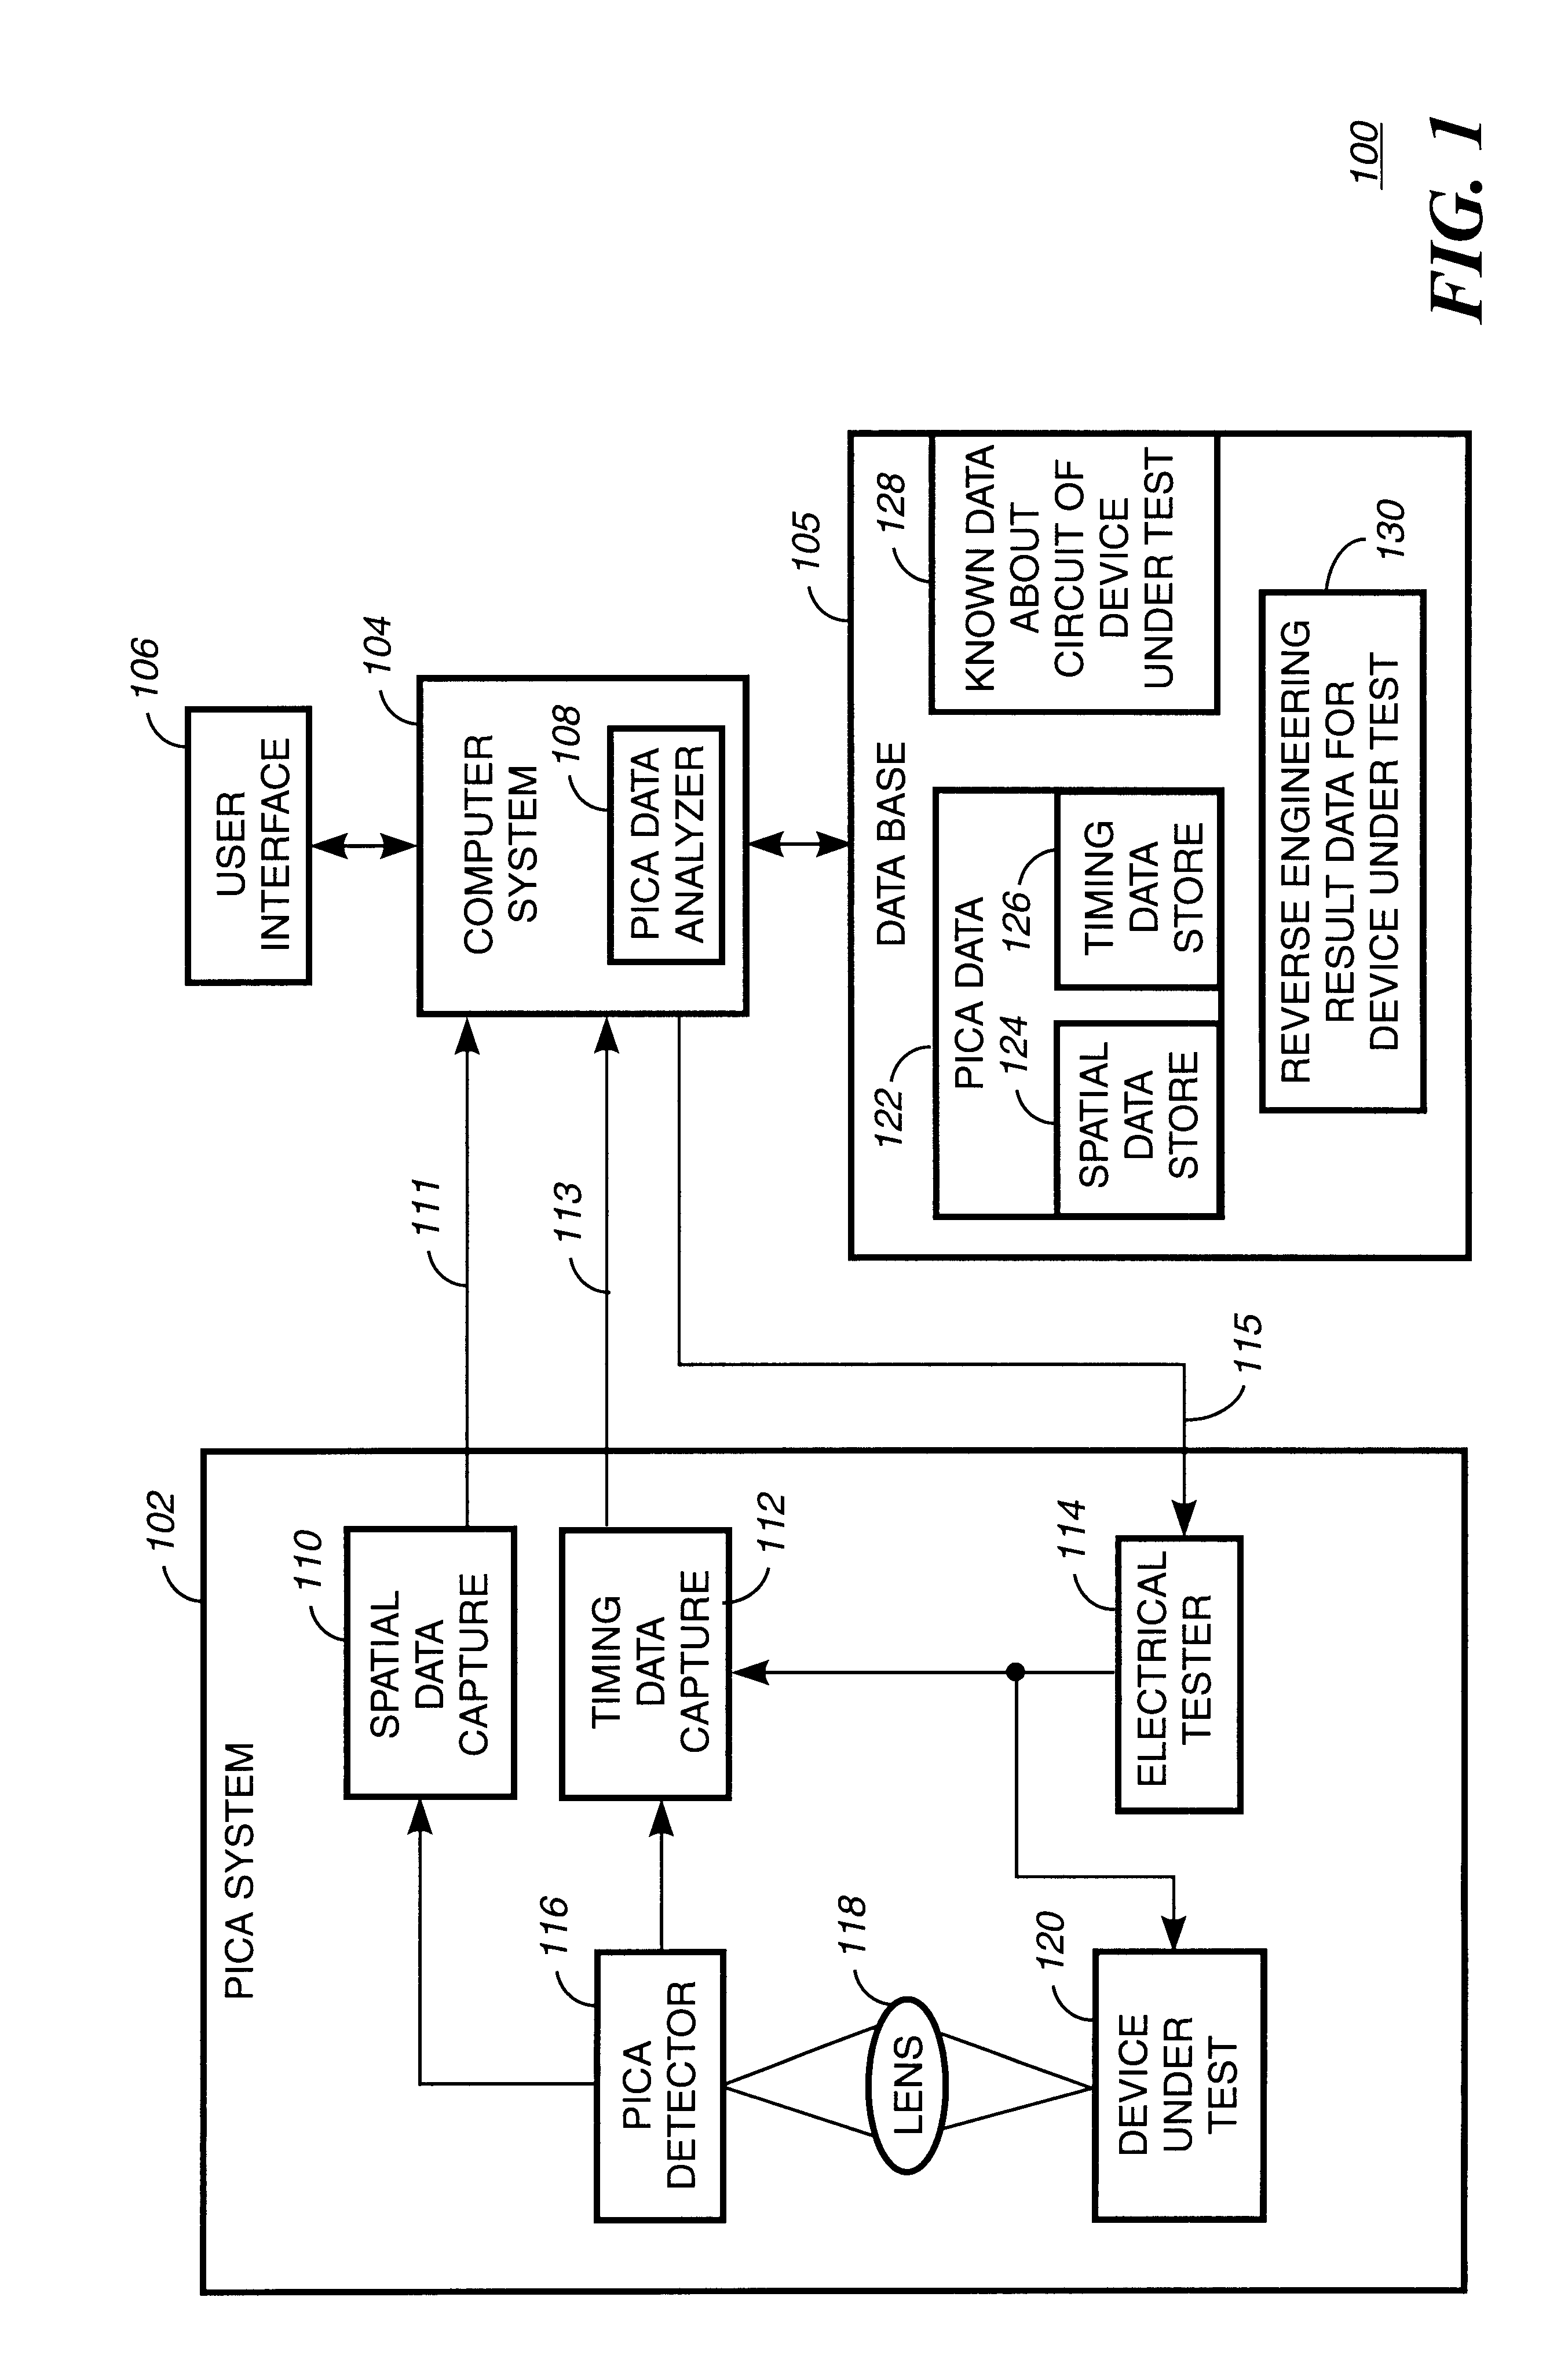 Method and apparatus for reverse engineering integrated circuits by monitoring optical emission